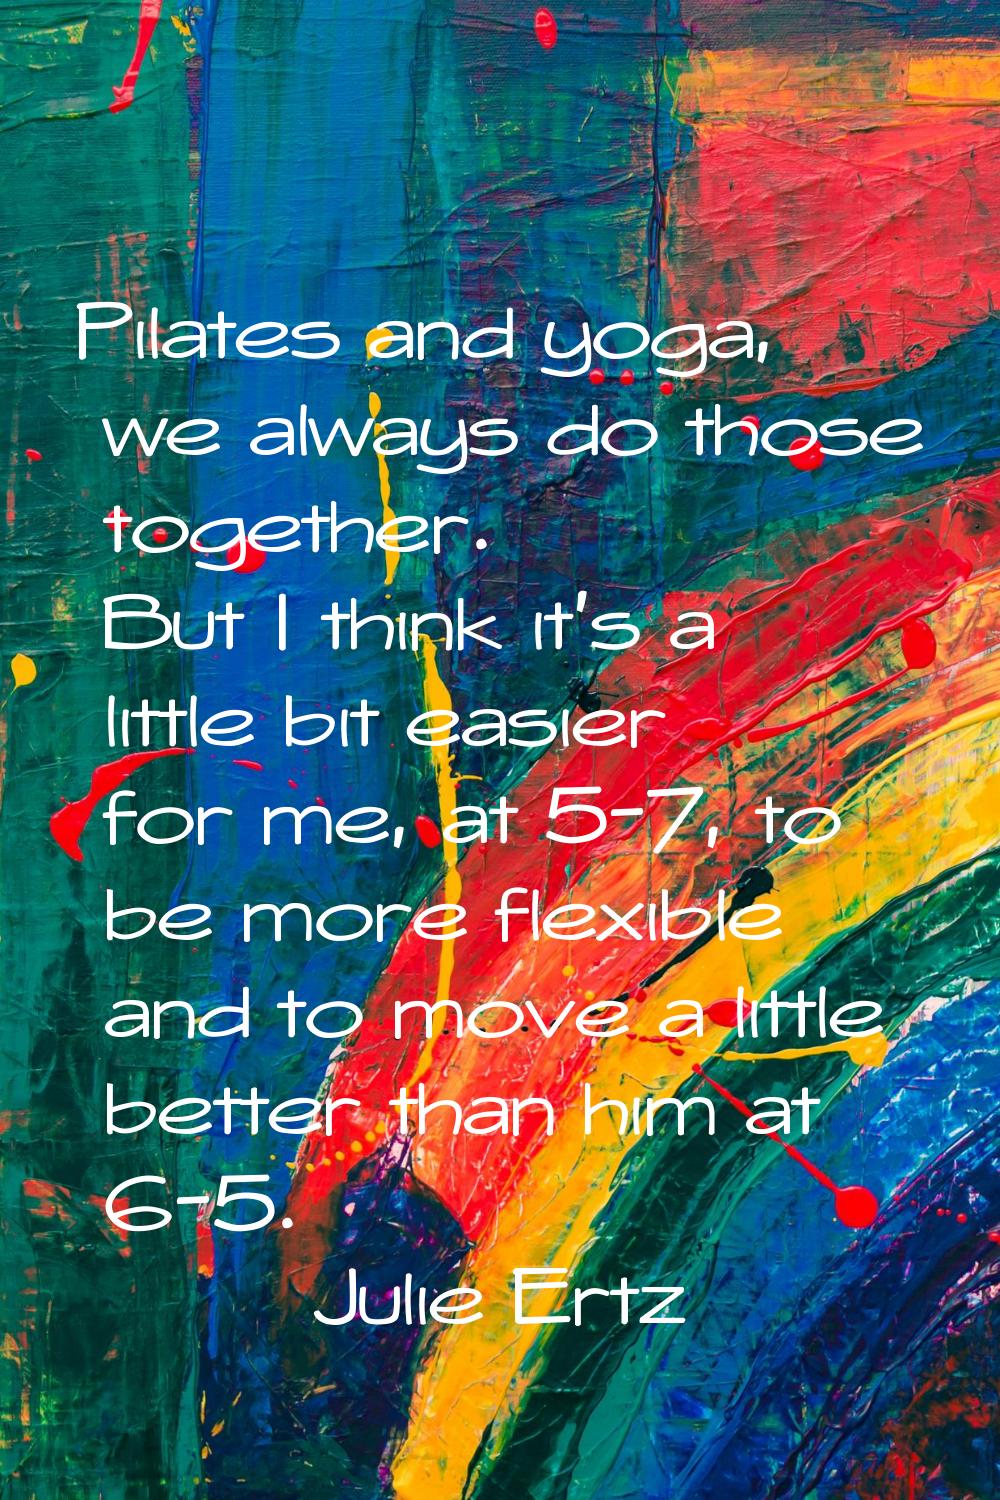 Pilates and yoga, we always do those together. But I think it's a little bit easier for me, at 5-7,